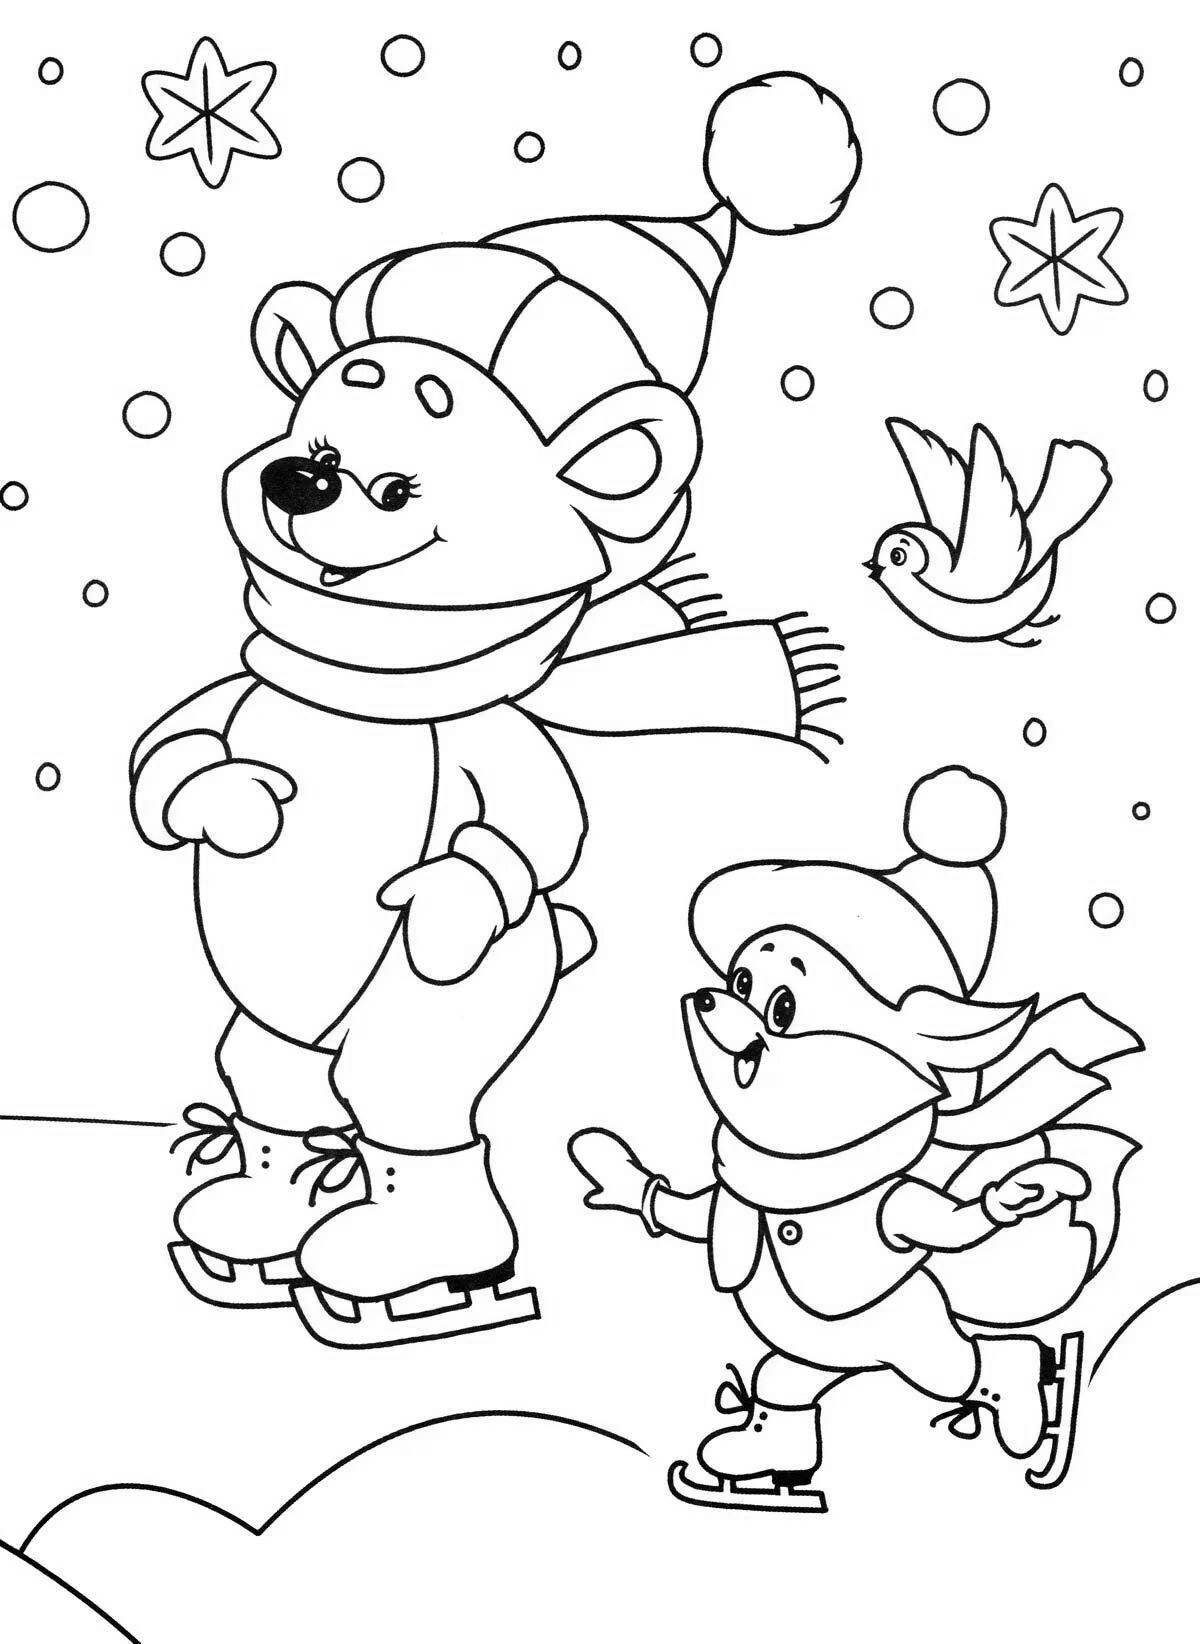 Great coloring page 4 5 years of winter